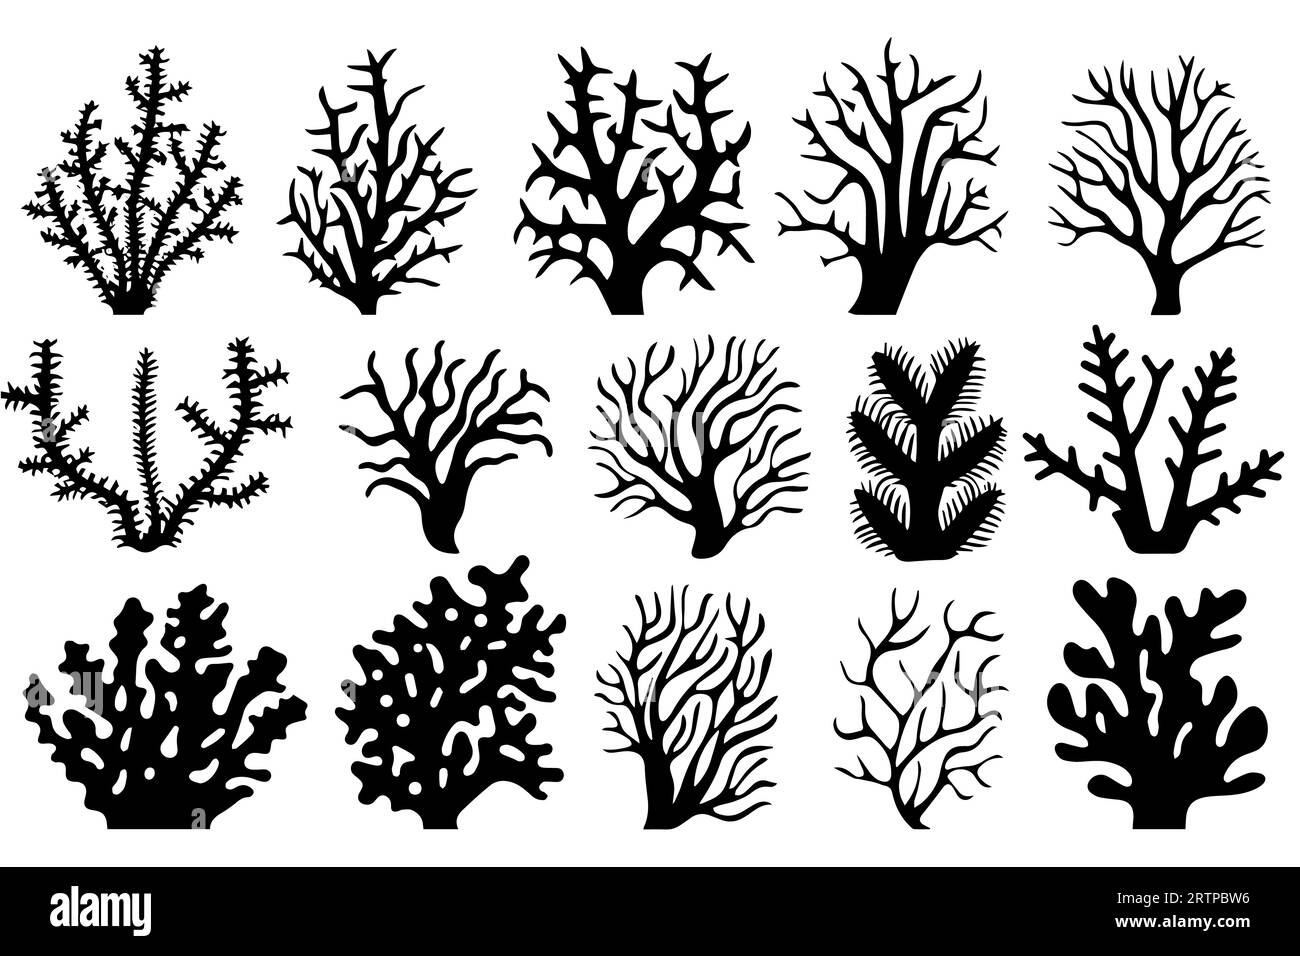 Hand drawn set of corals and seaweed silhouette isolated on white ...